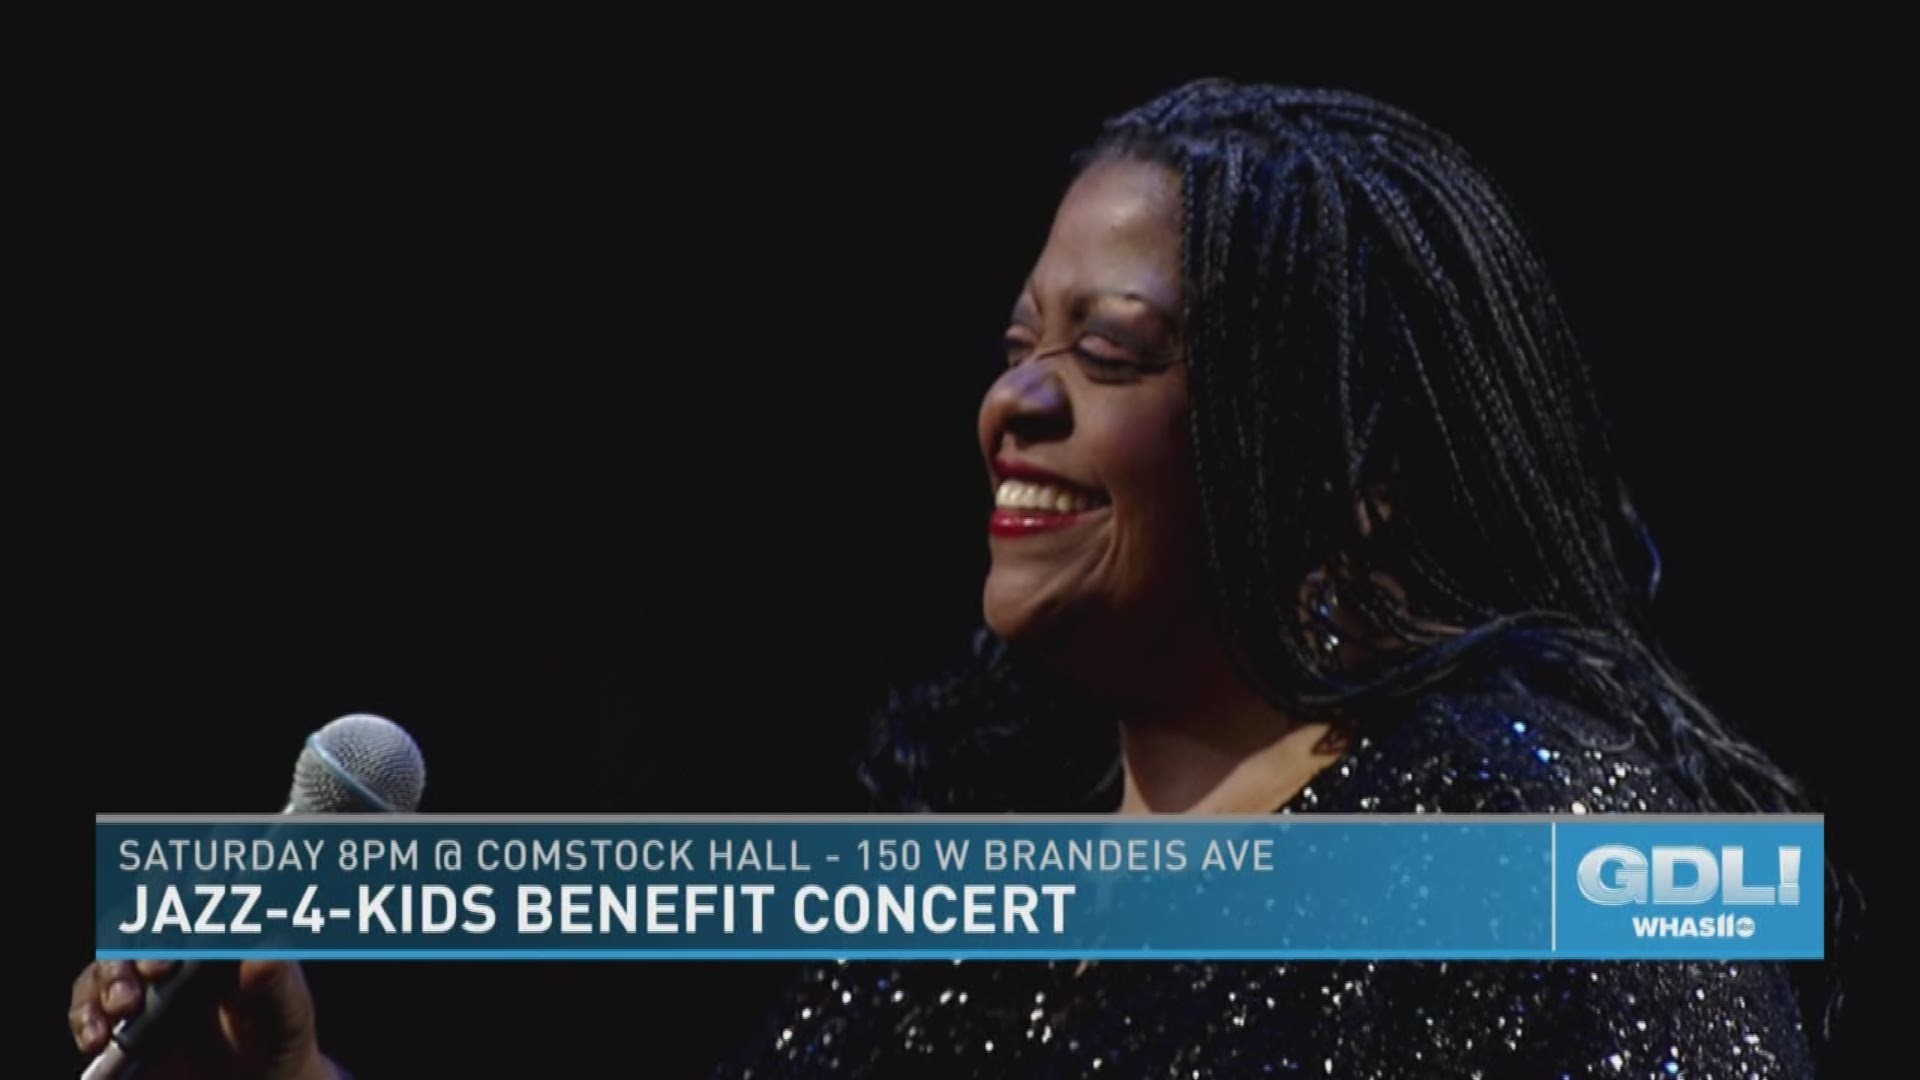 Grammy-Award winning jazz vocalist Carmen Bradford has performed and recorded with legends like Frank Sinatra, Tony Bennett, James Brown and countless others. The  Jazz for Kids benefit concert featuring Carmen Bradford is Saturday, April 6, 2019 starting at 8 PM at UofL's Comstock Hall off West Brandeis Avenue.